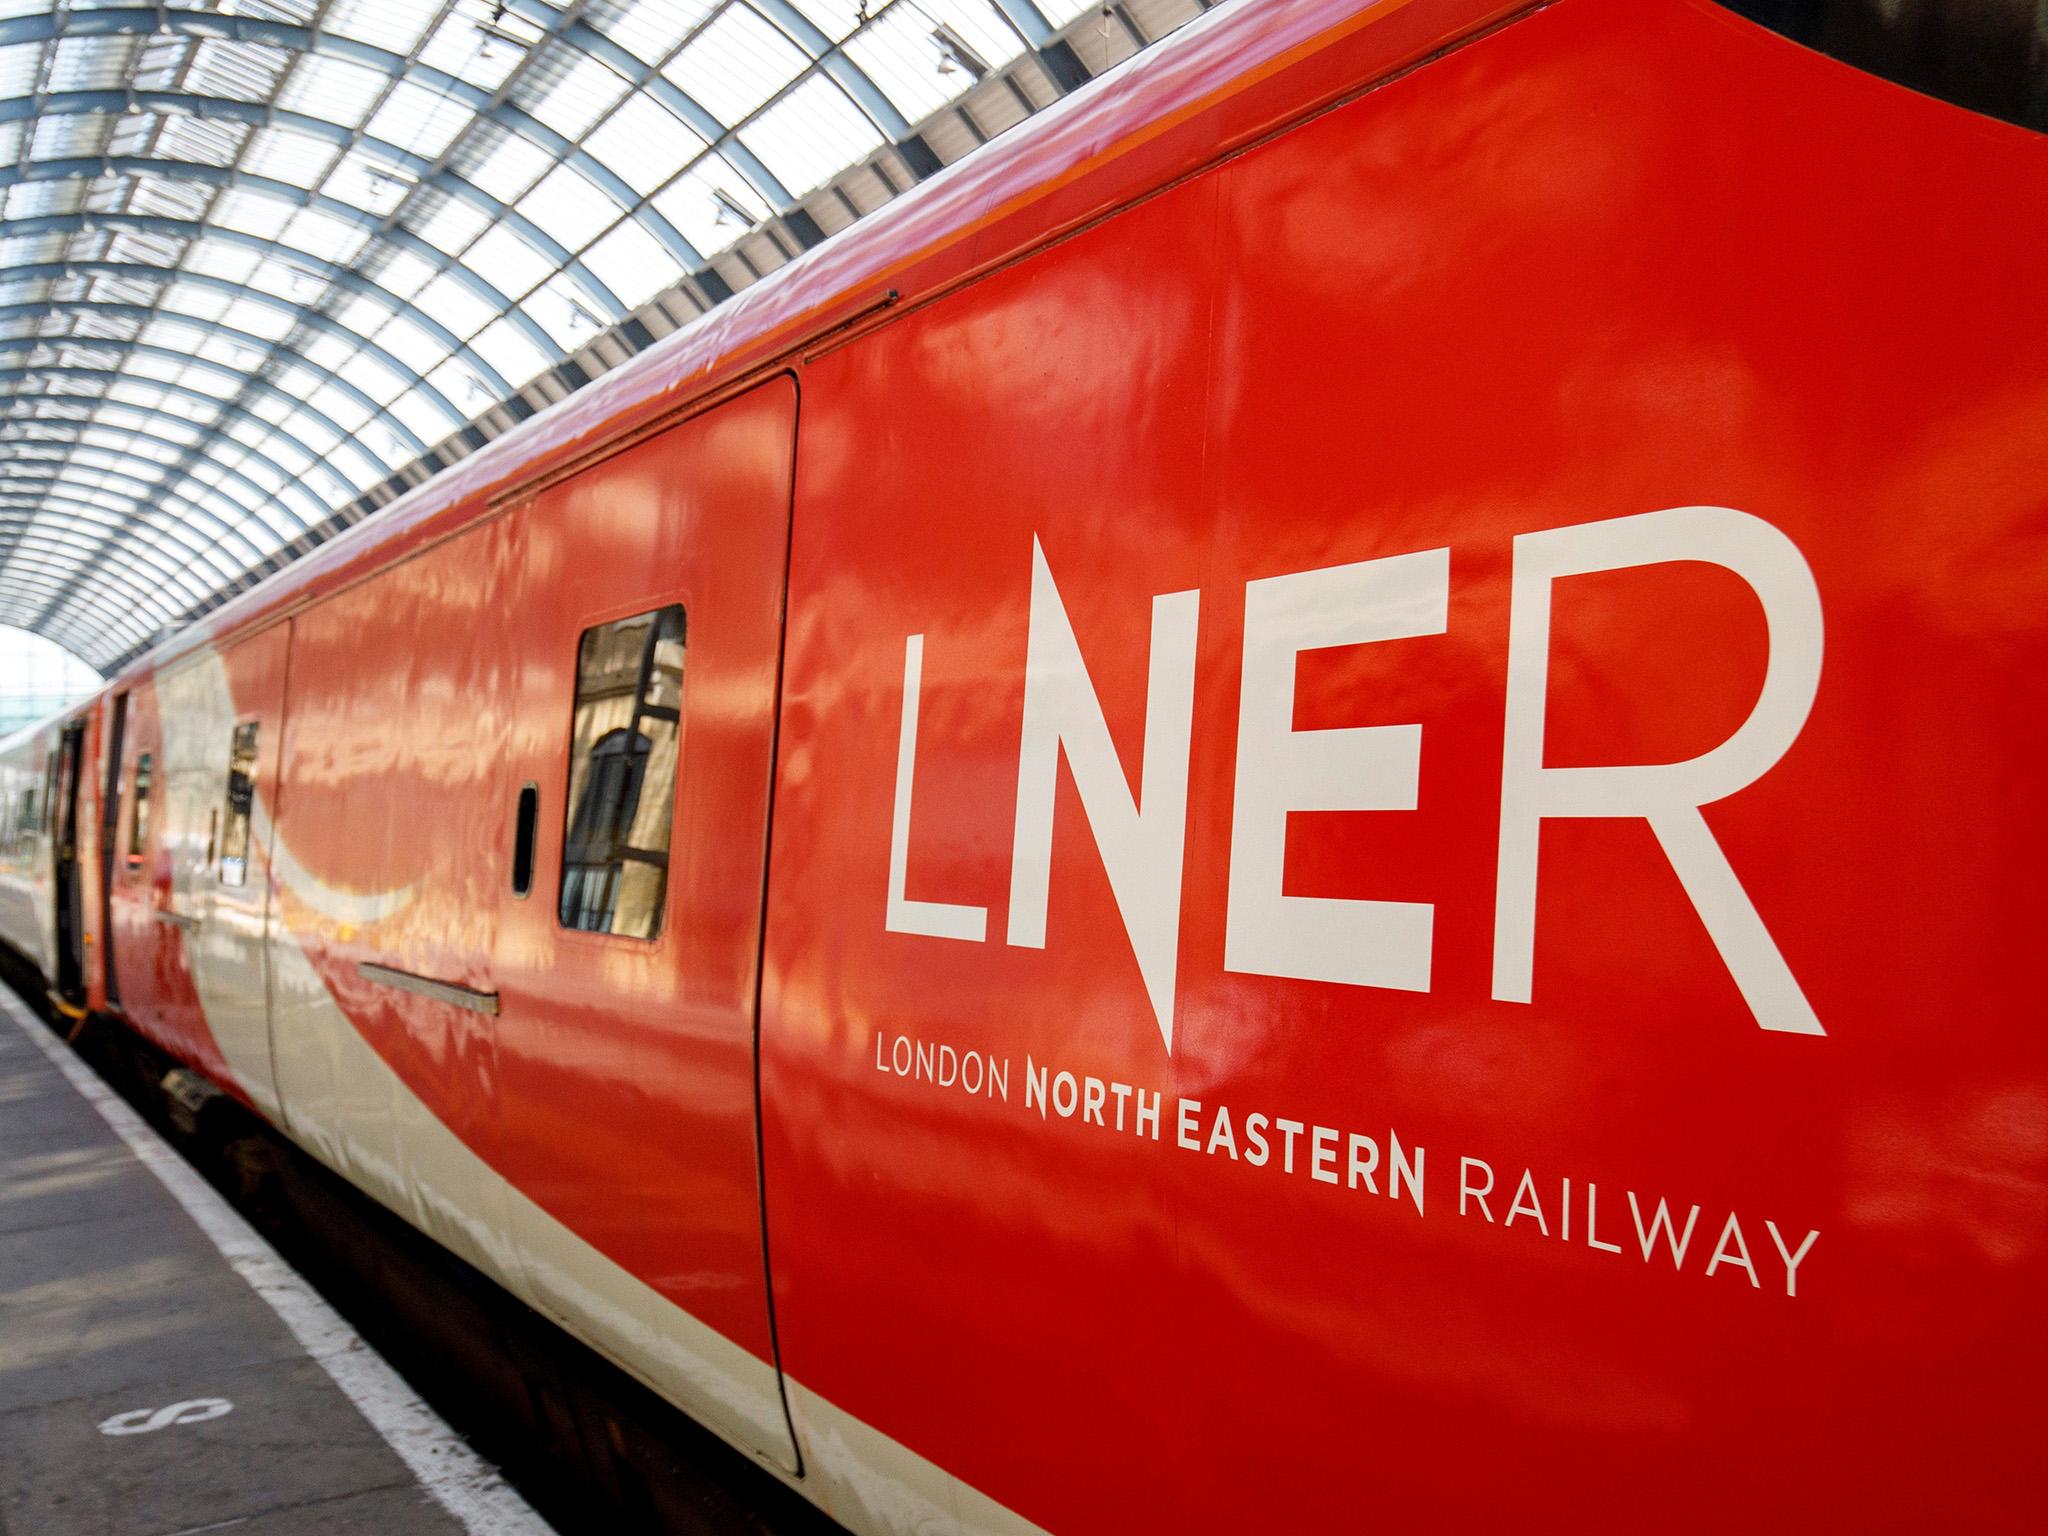 Our reader encountered a number of problems on an LNER journey